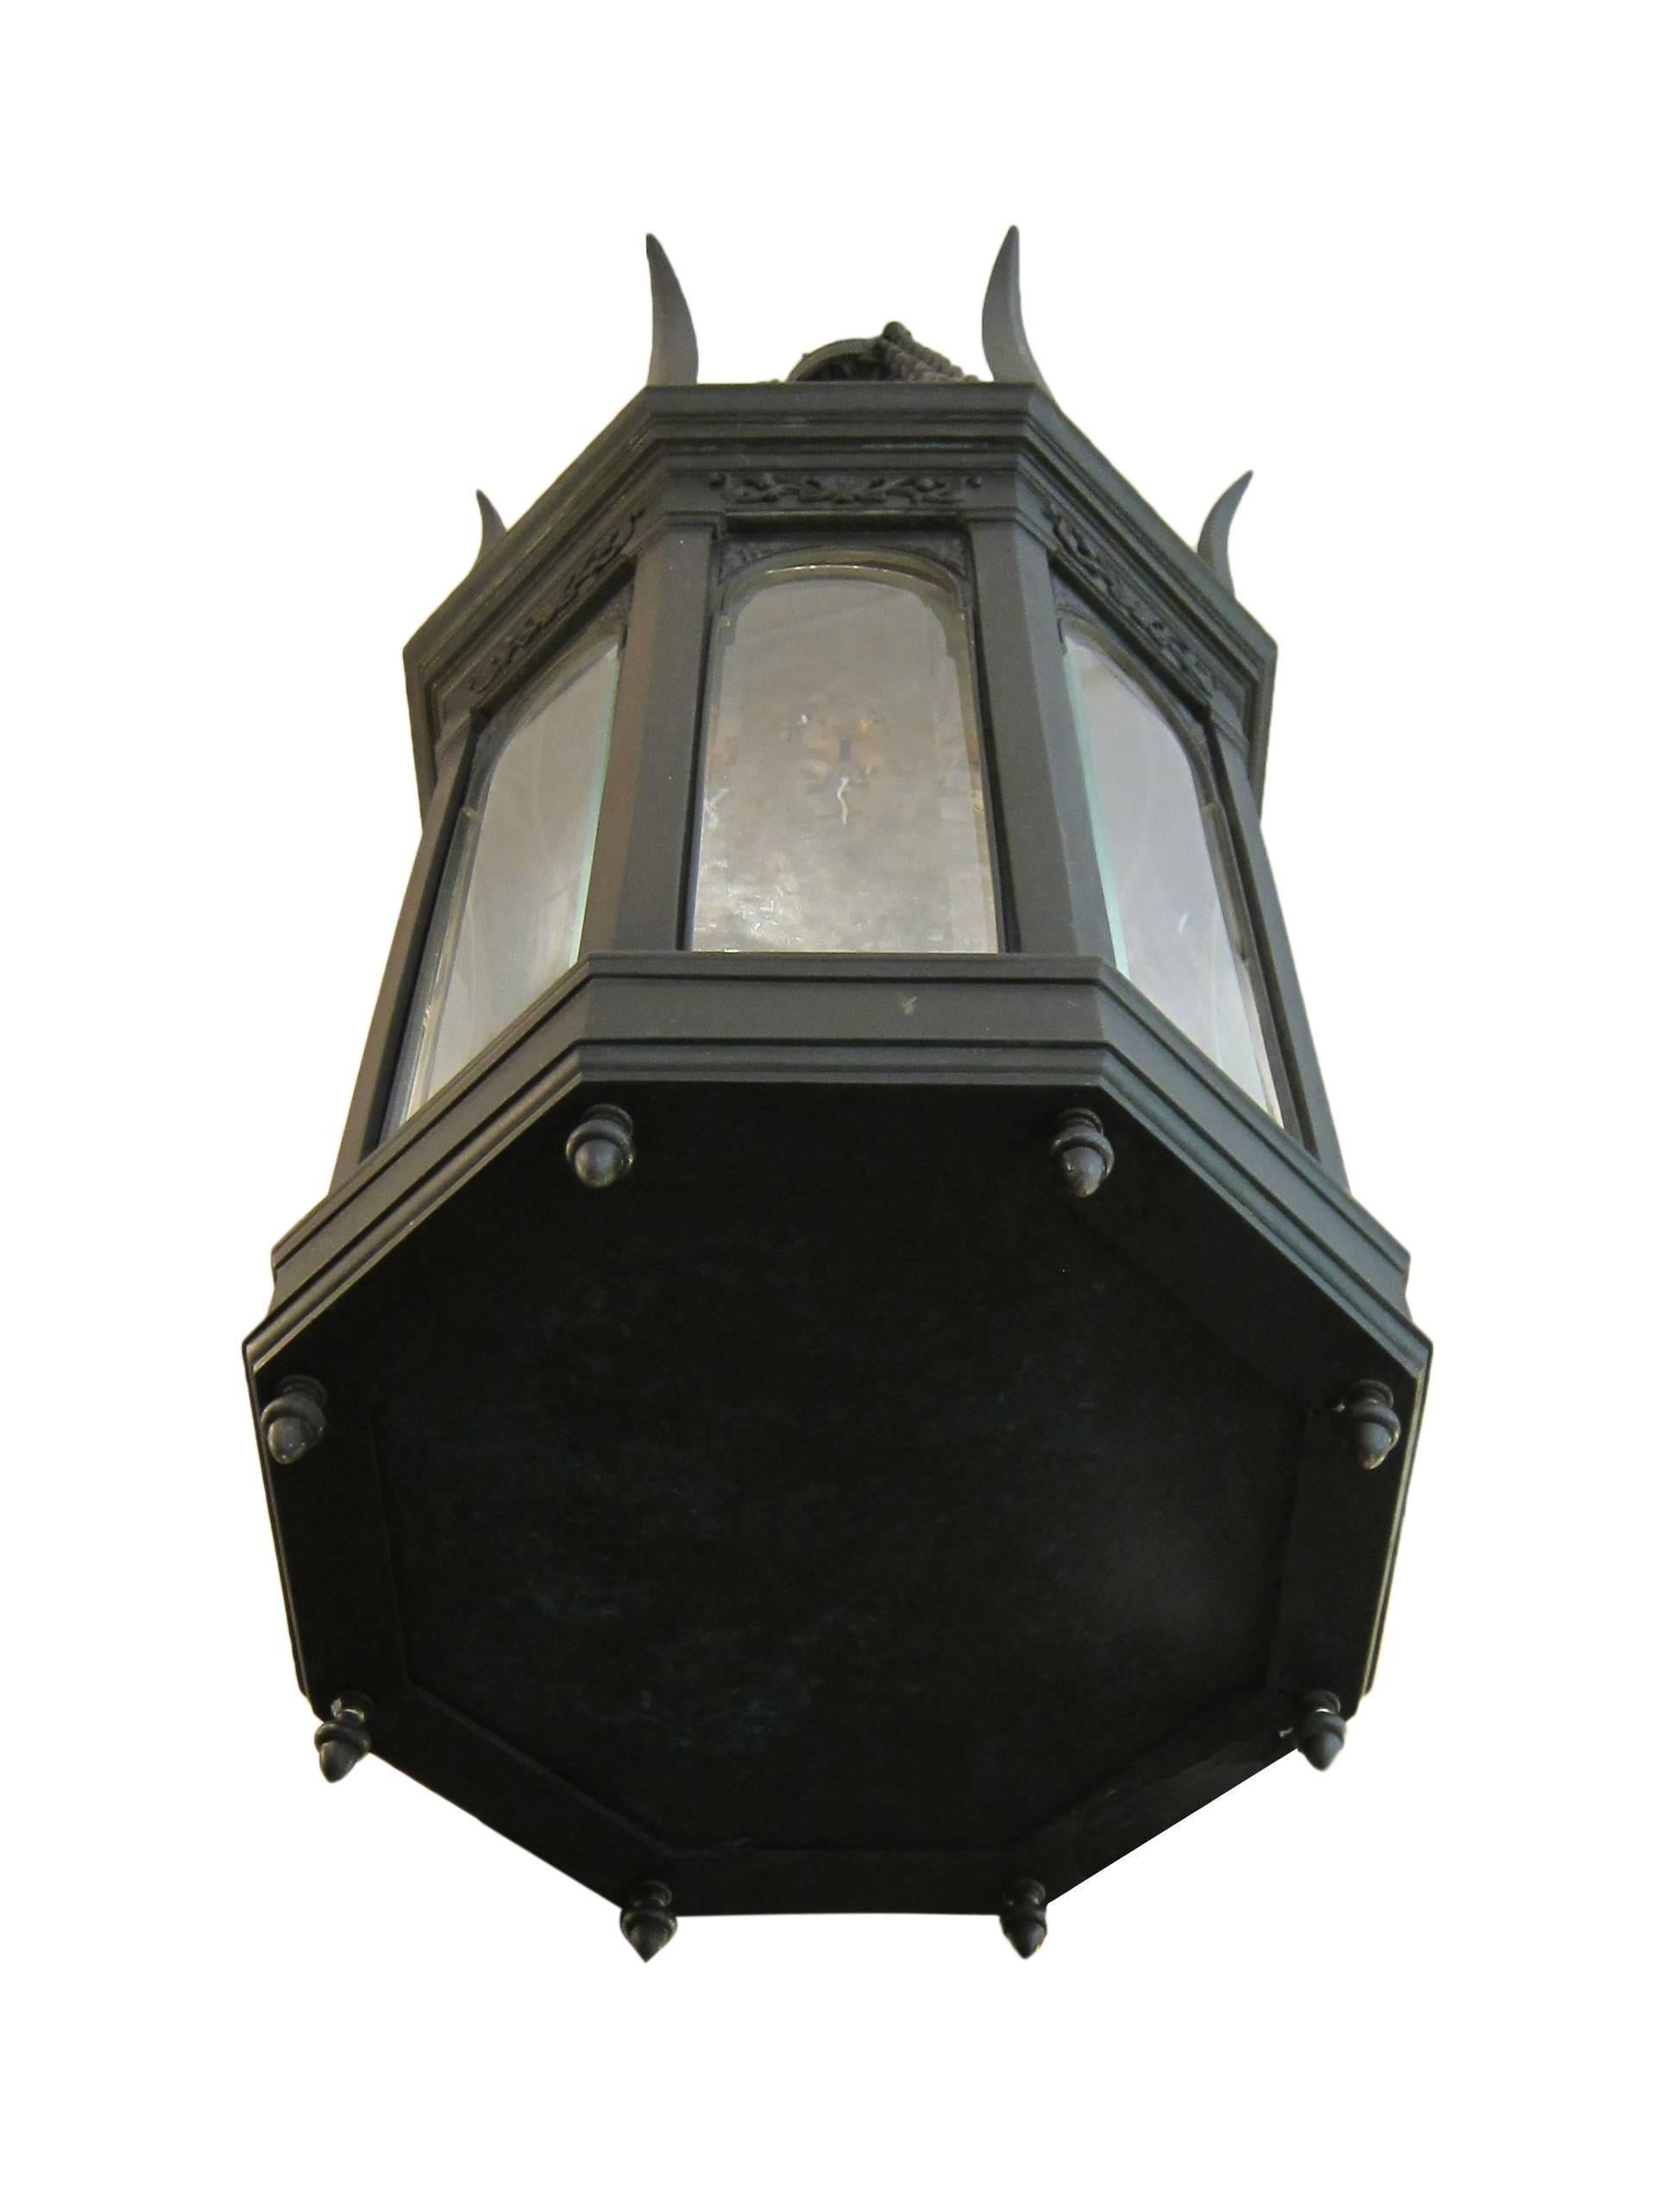 1900s American made octagon lantern pendant fashioned out of bronze patina with beveled glass and presented in a Gothic style. This item can be viewed at our 5 East 16th St, Union Square location in Manhattan.